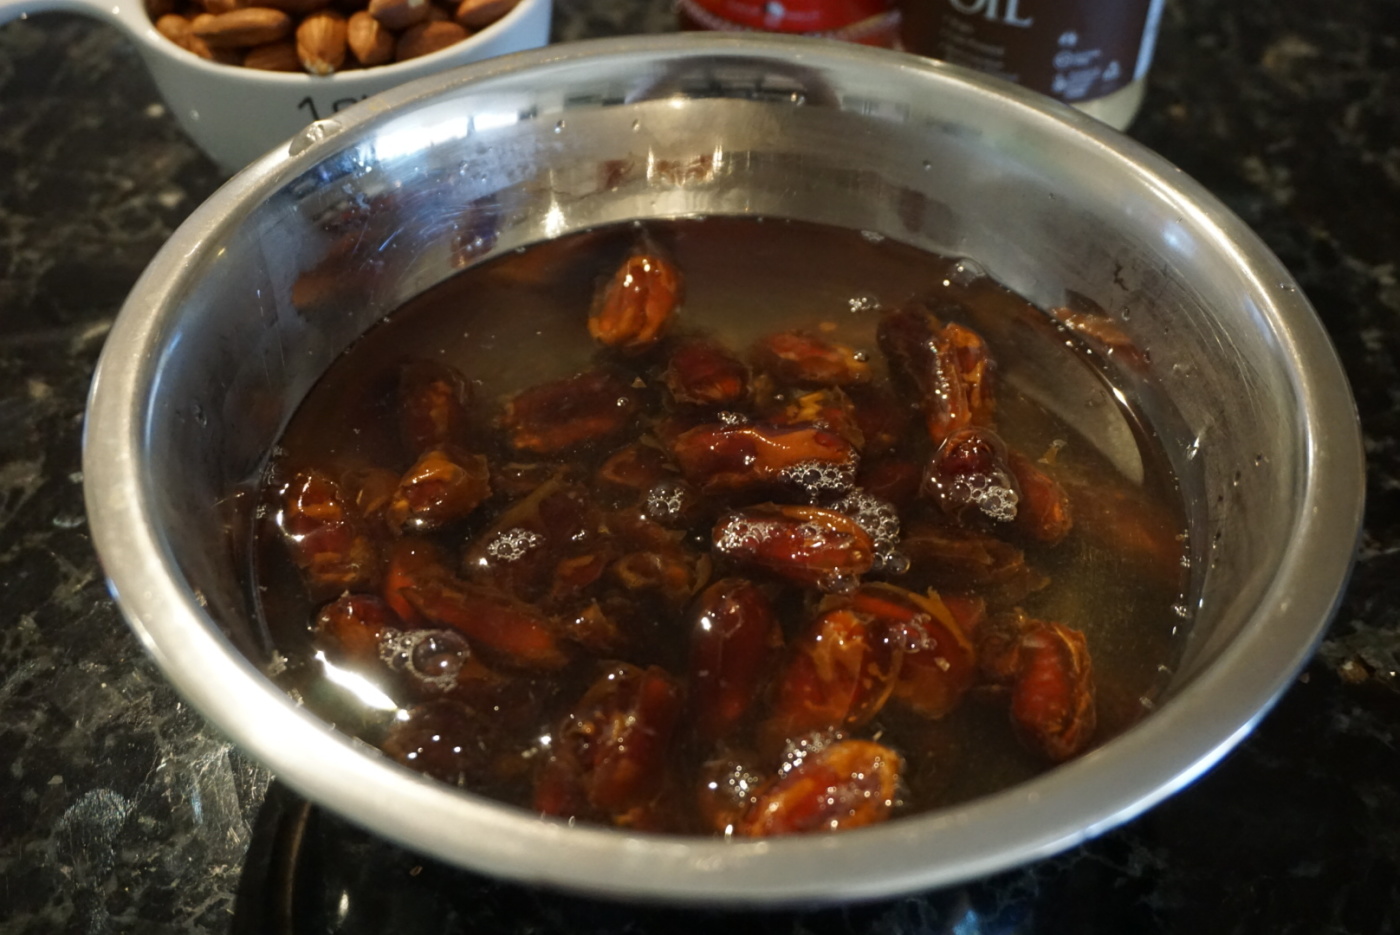 Soak the dates in warm water for 15 minutes